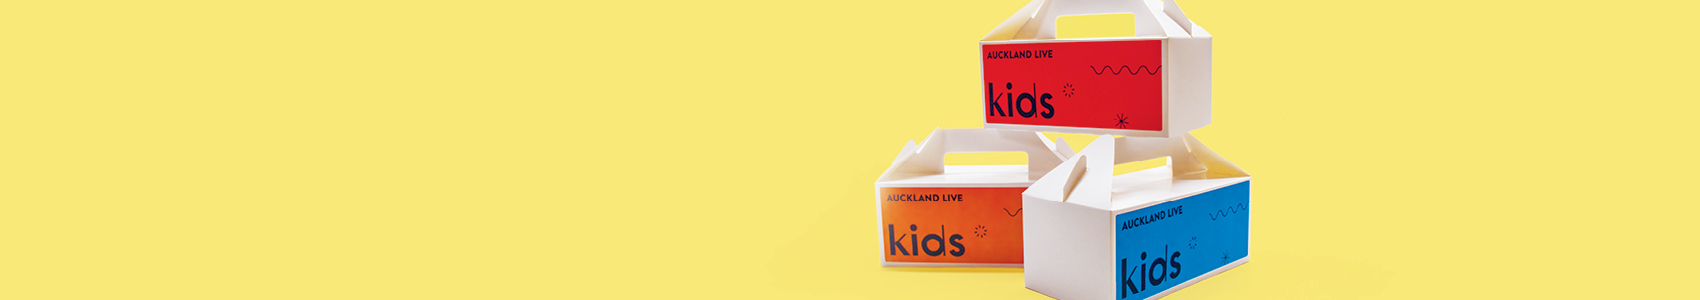 Auckland Live Kids Lunchboxes